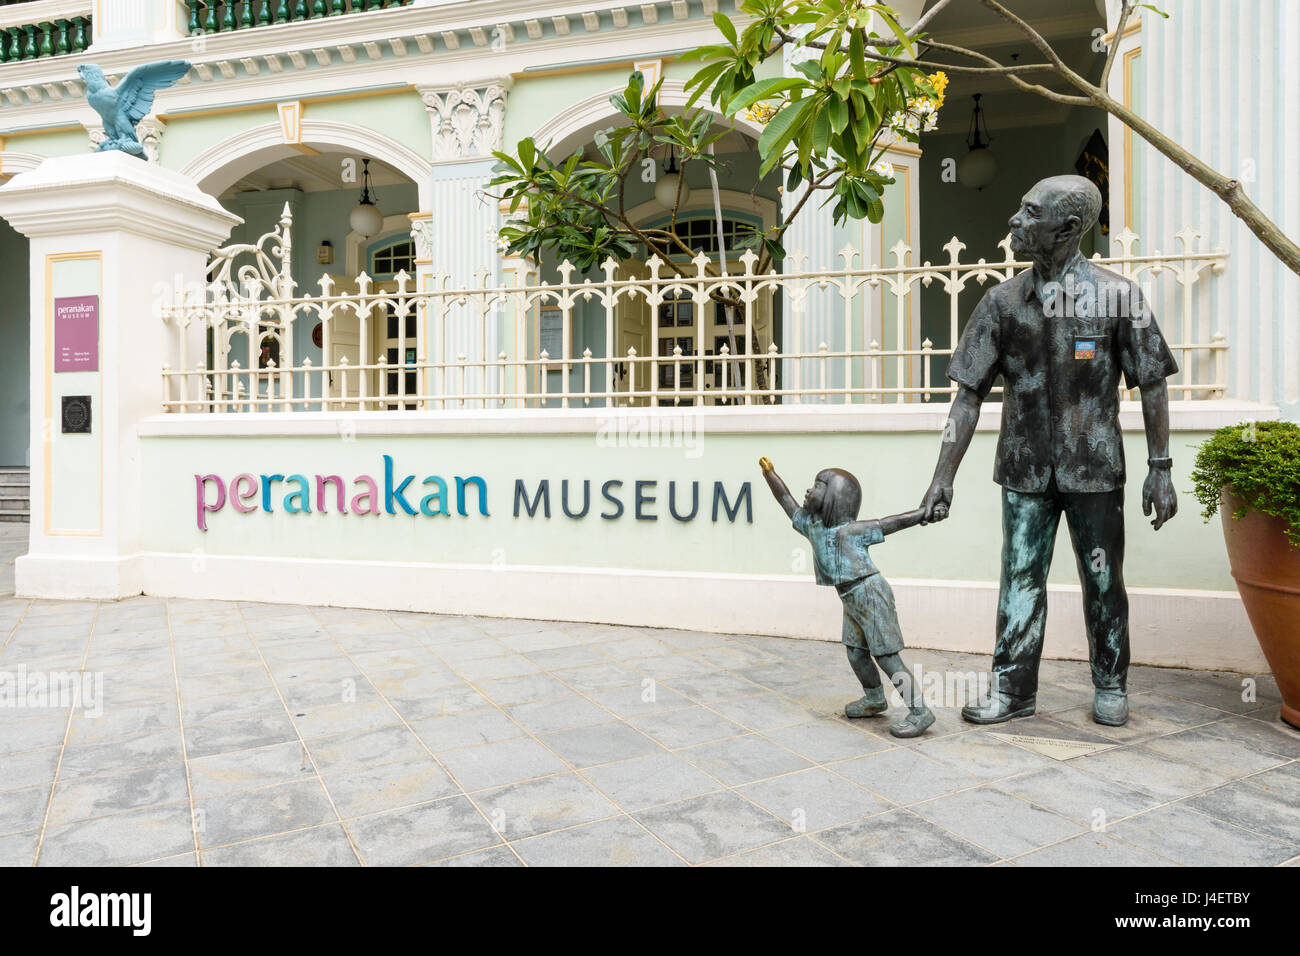 Peranakan Museum of Singapore celebrating Straits Chinese culture in Southeast Asia housed in the Old Tao Nan School building Stock Photo